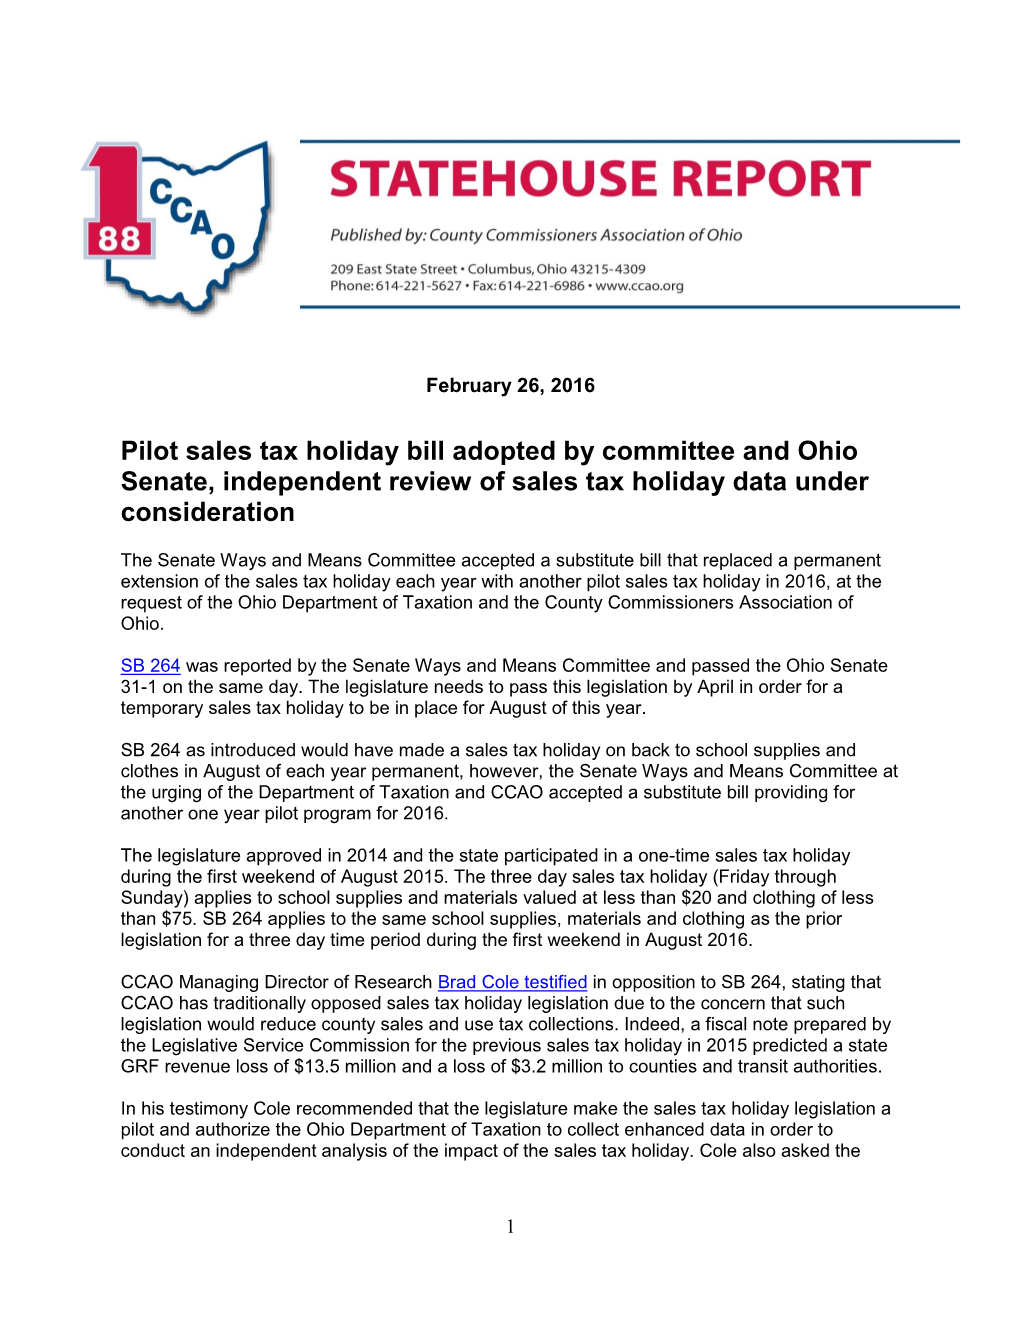 Pilot Sales Tax Holiday Bill Adopted by Committee and Ohio Senate, Independent Review of Sales Tax Holiday Data Under Consideration